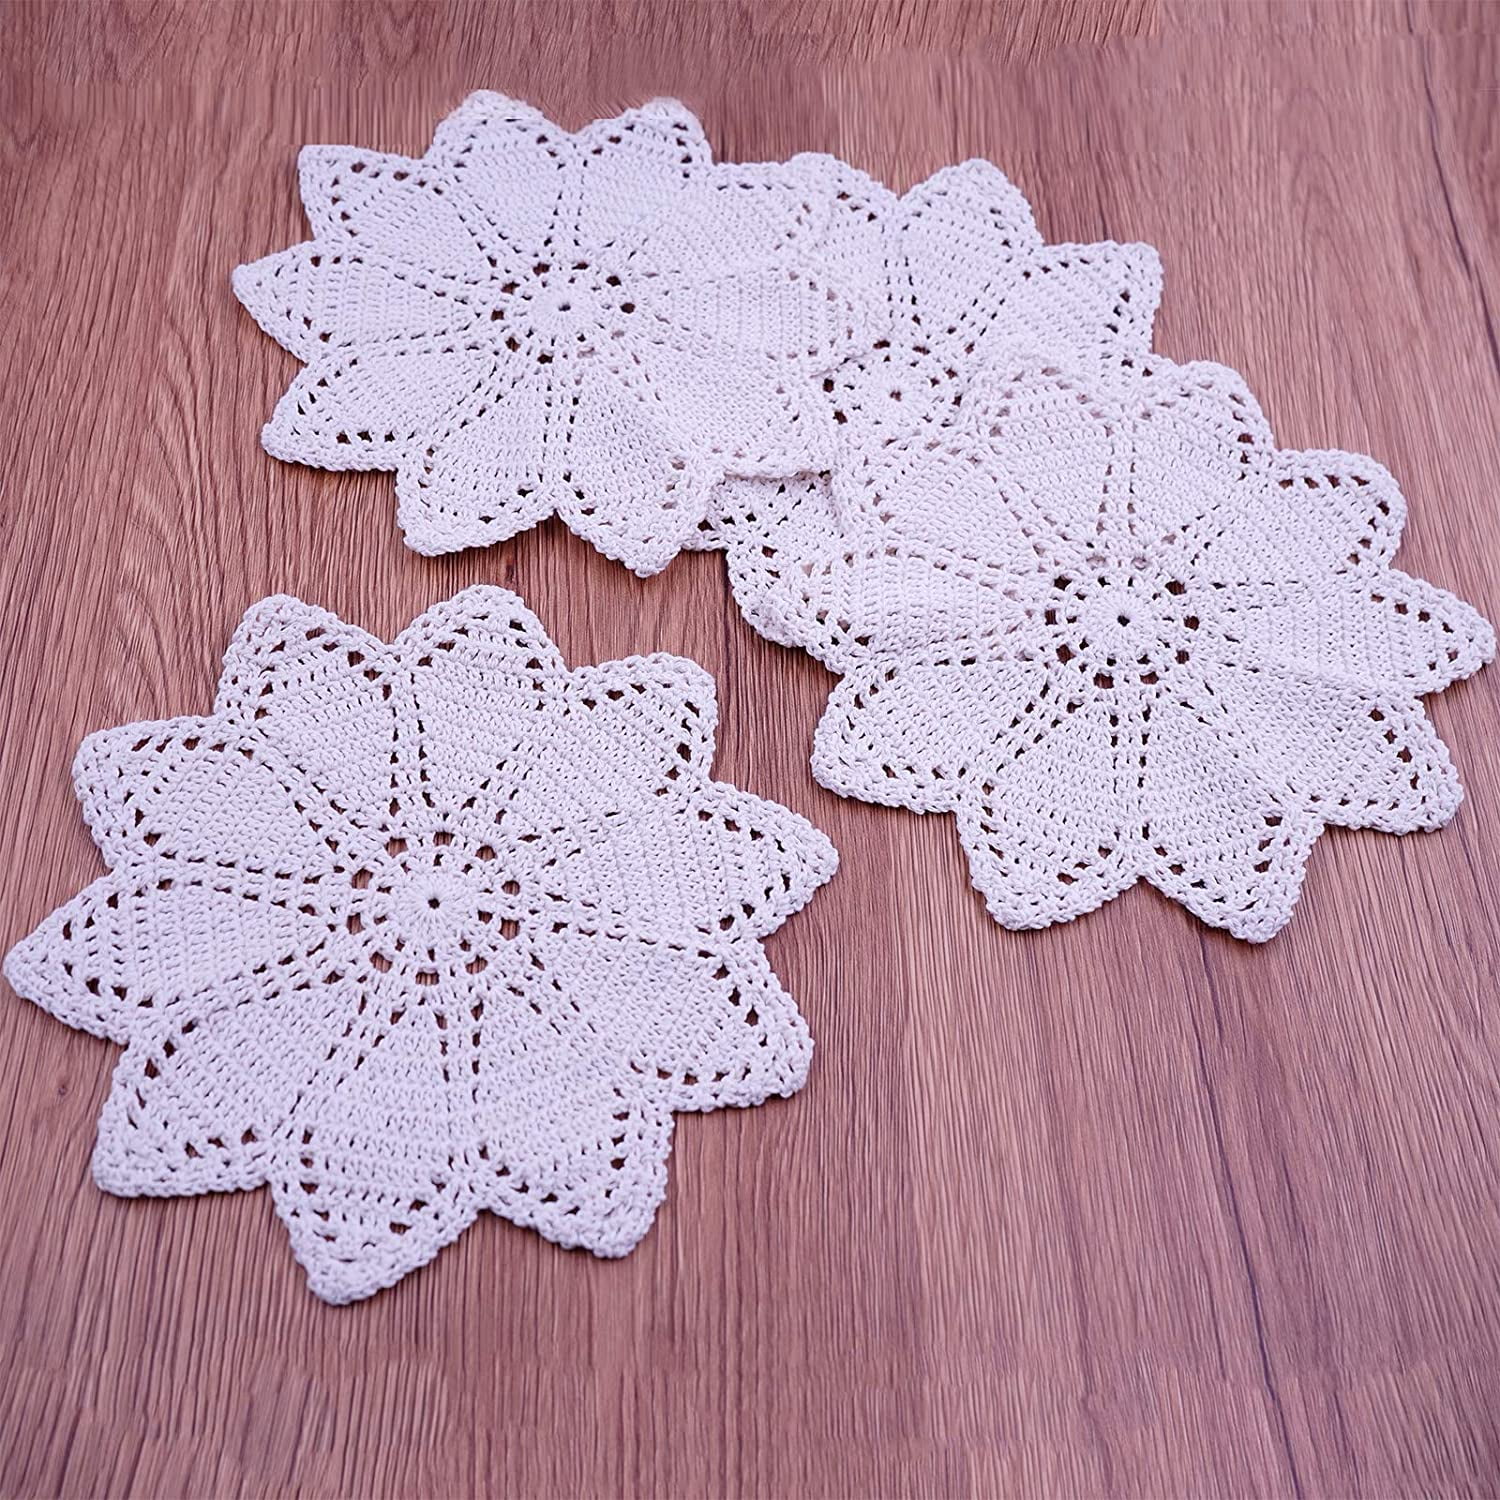 8 Inch Doilies Crochet Round Lace Beige Handmade Cotton Coasters Pack Of 8 